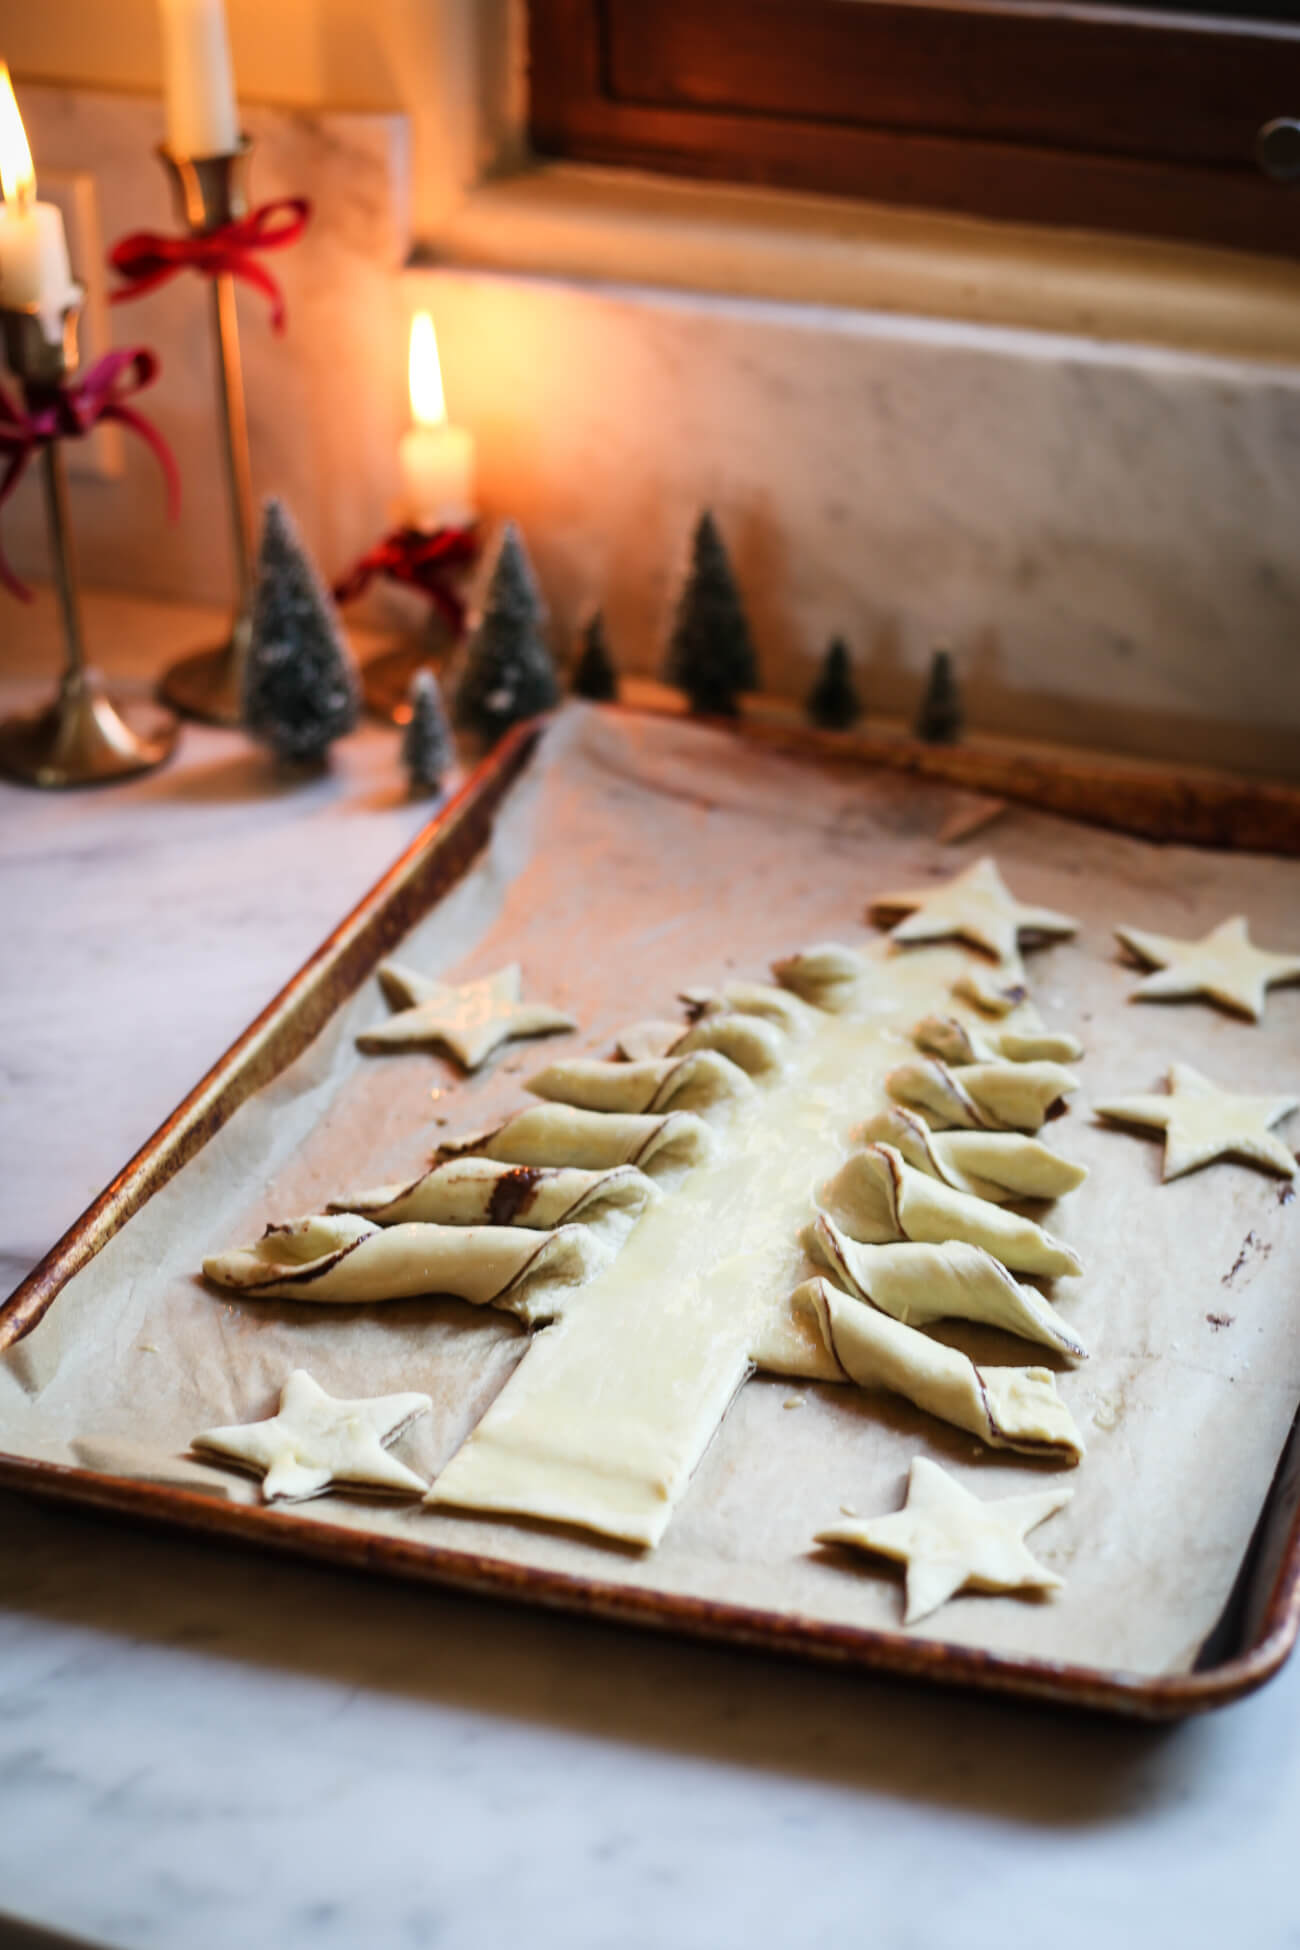 A Nutella puff pastry Christmas tree on a baking sheet in a marble kitchen before going into the oven. The Christmas tree branches are twists. Cut out puff pastry stars are around the tree. 